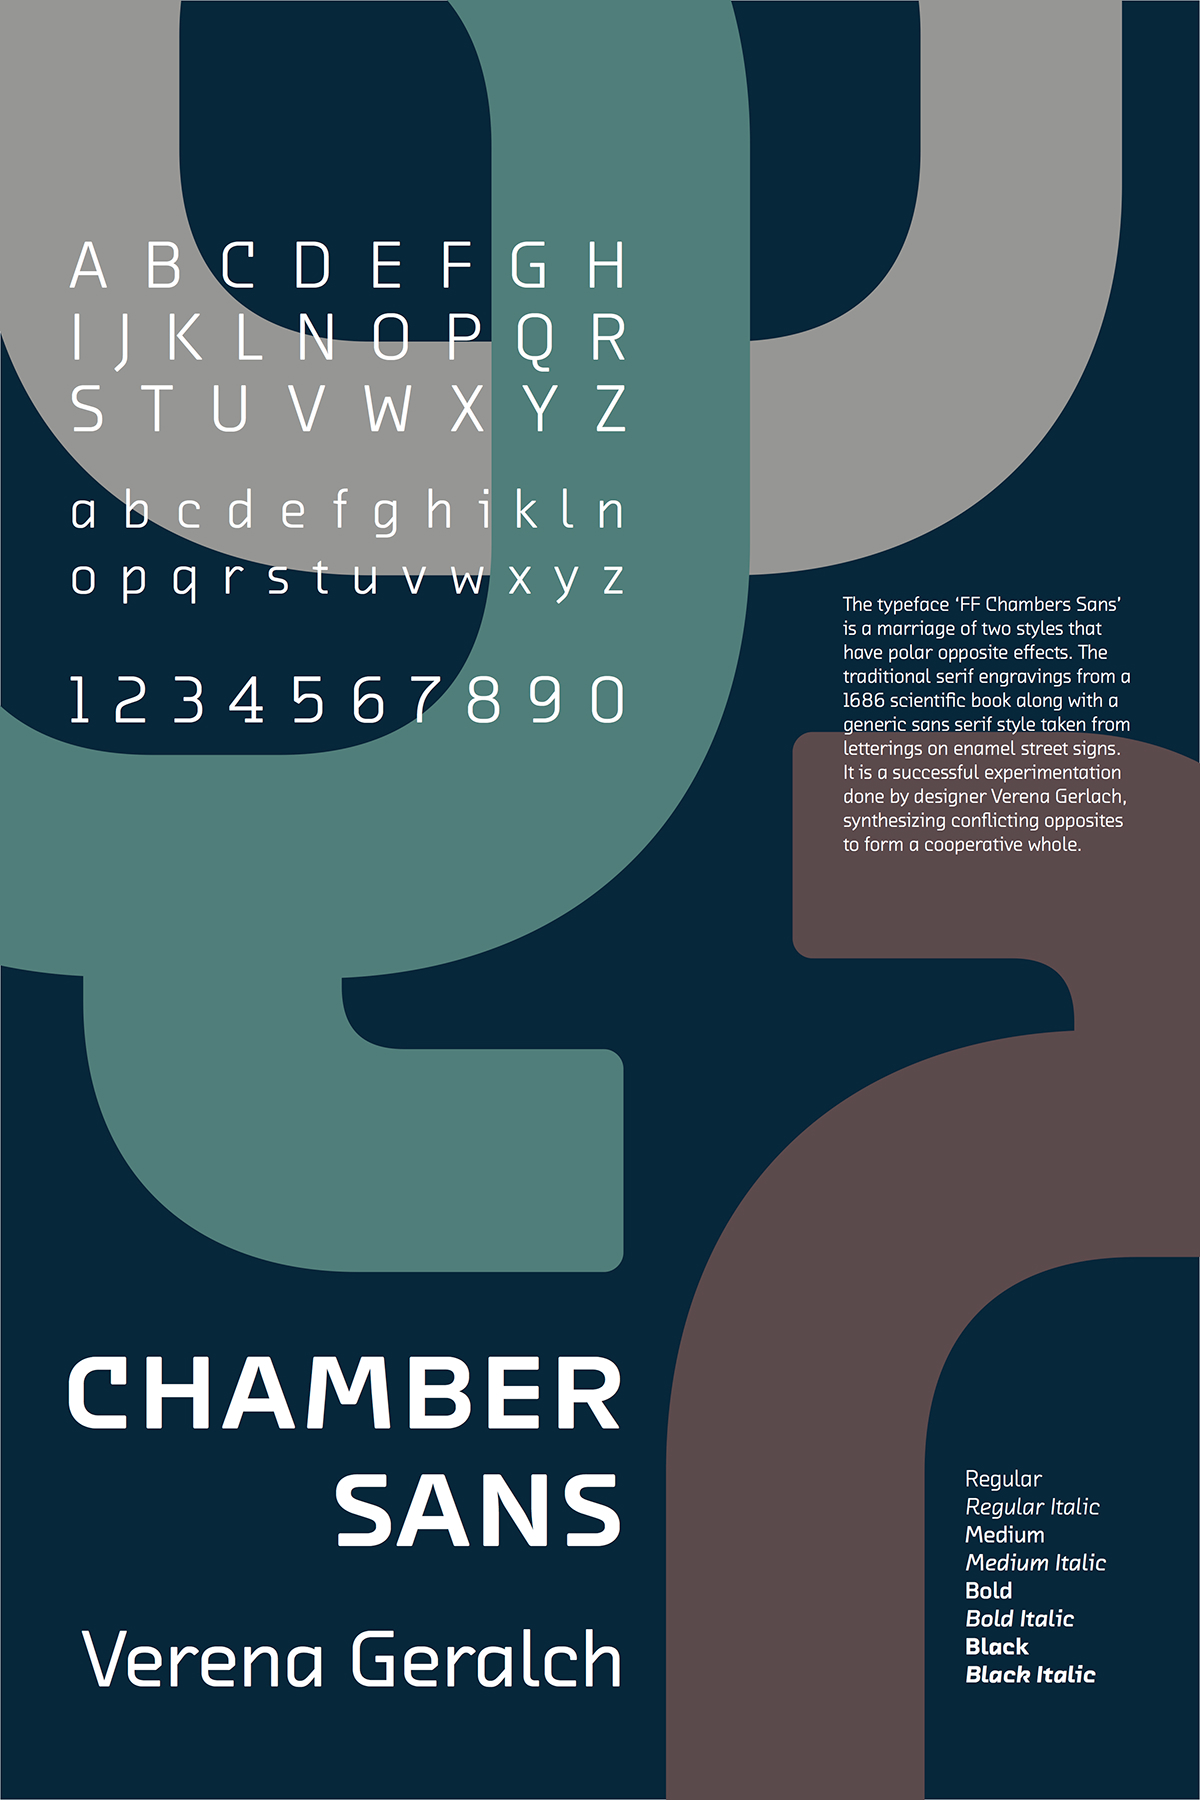 specimen Type Specimen type specimen poster poster ff chambers type poster